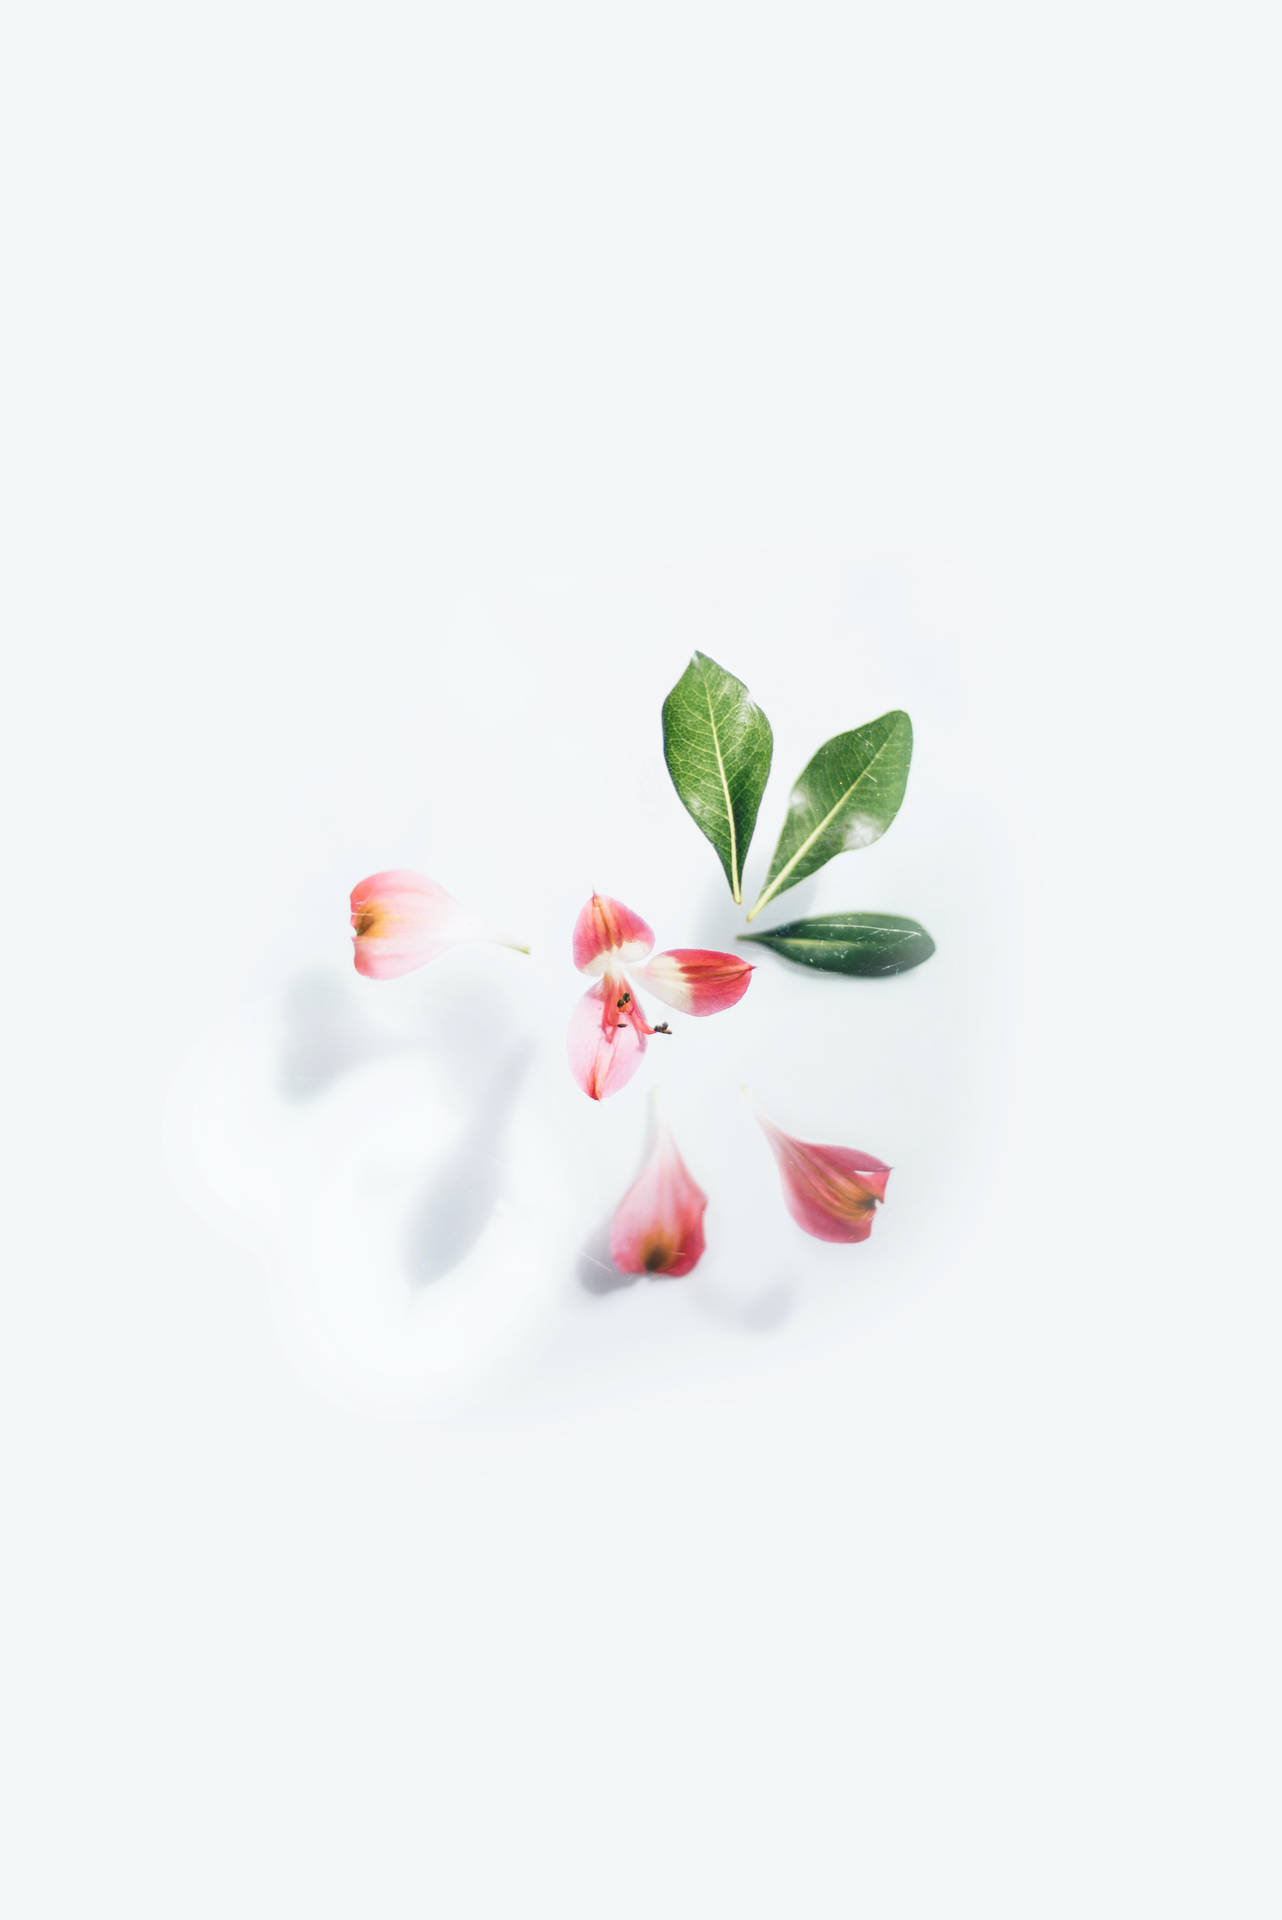 Pink Petals In White Background Wallpaper